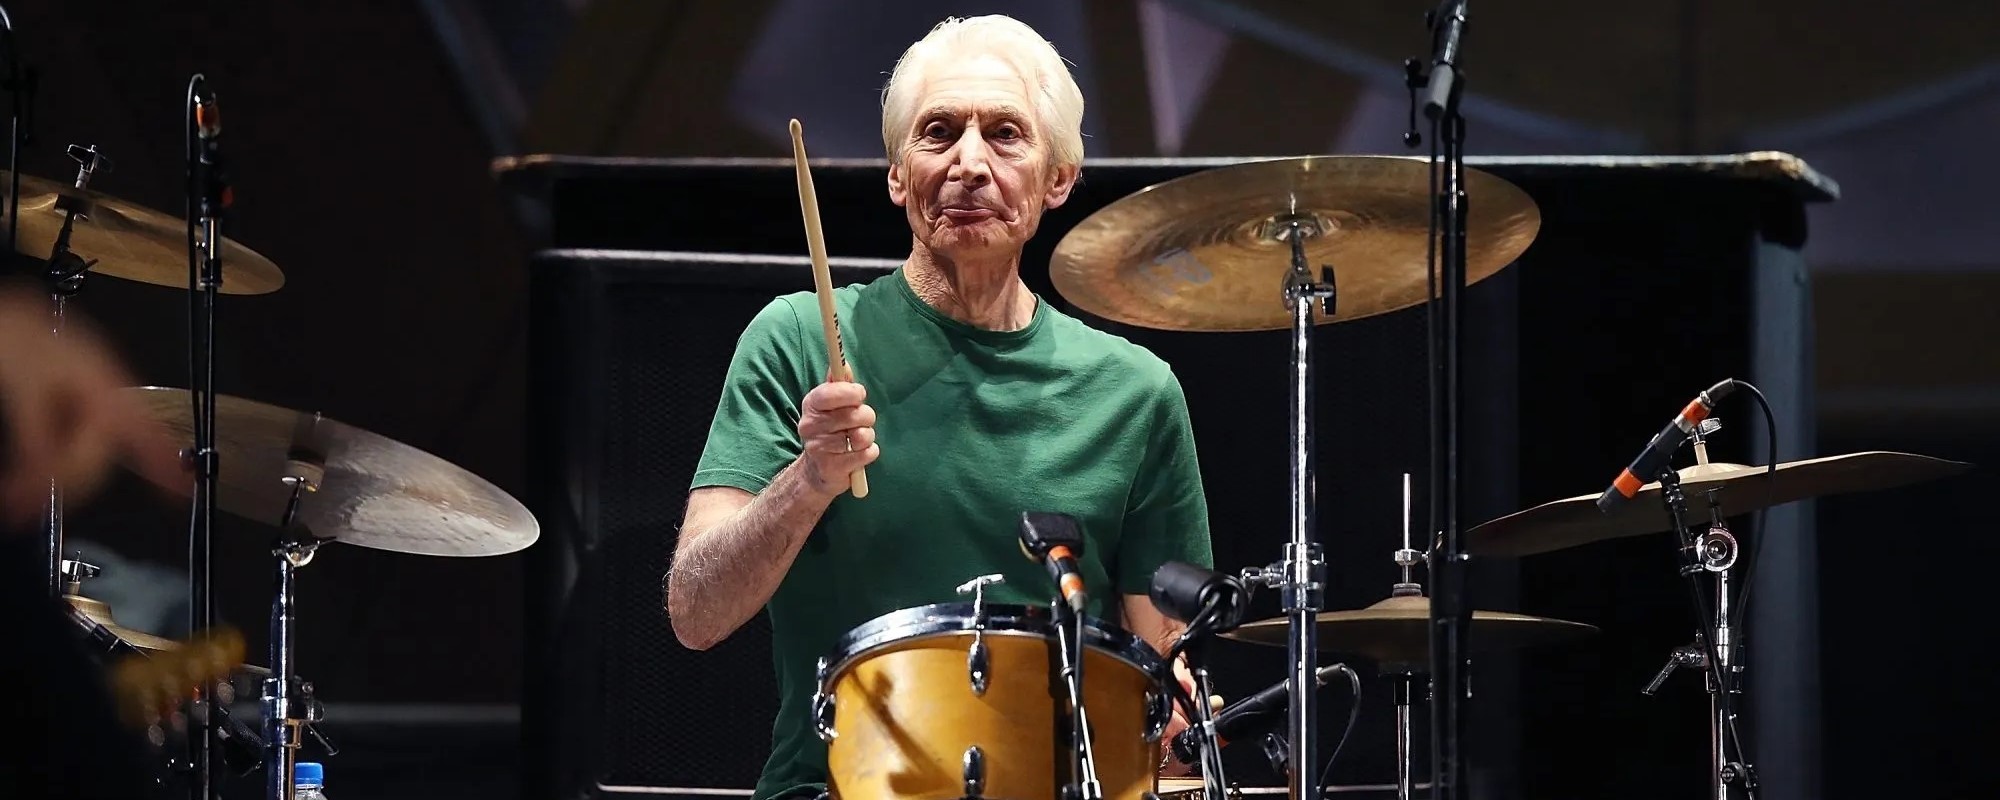 The Rolling Stones Share Birthday Tribute to Late Drummer and “One of the Greatest Musicians of His Age,” Charlie Watts